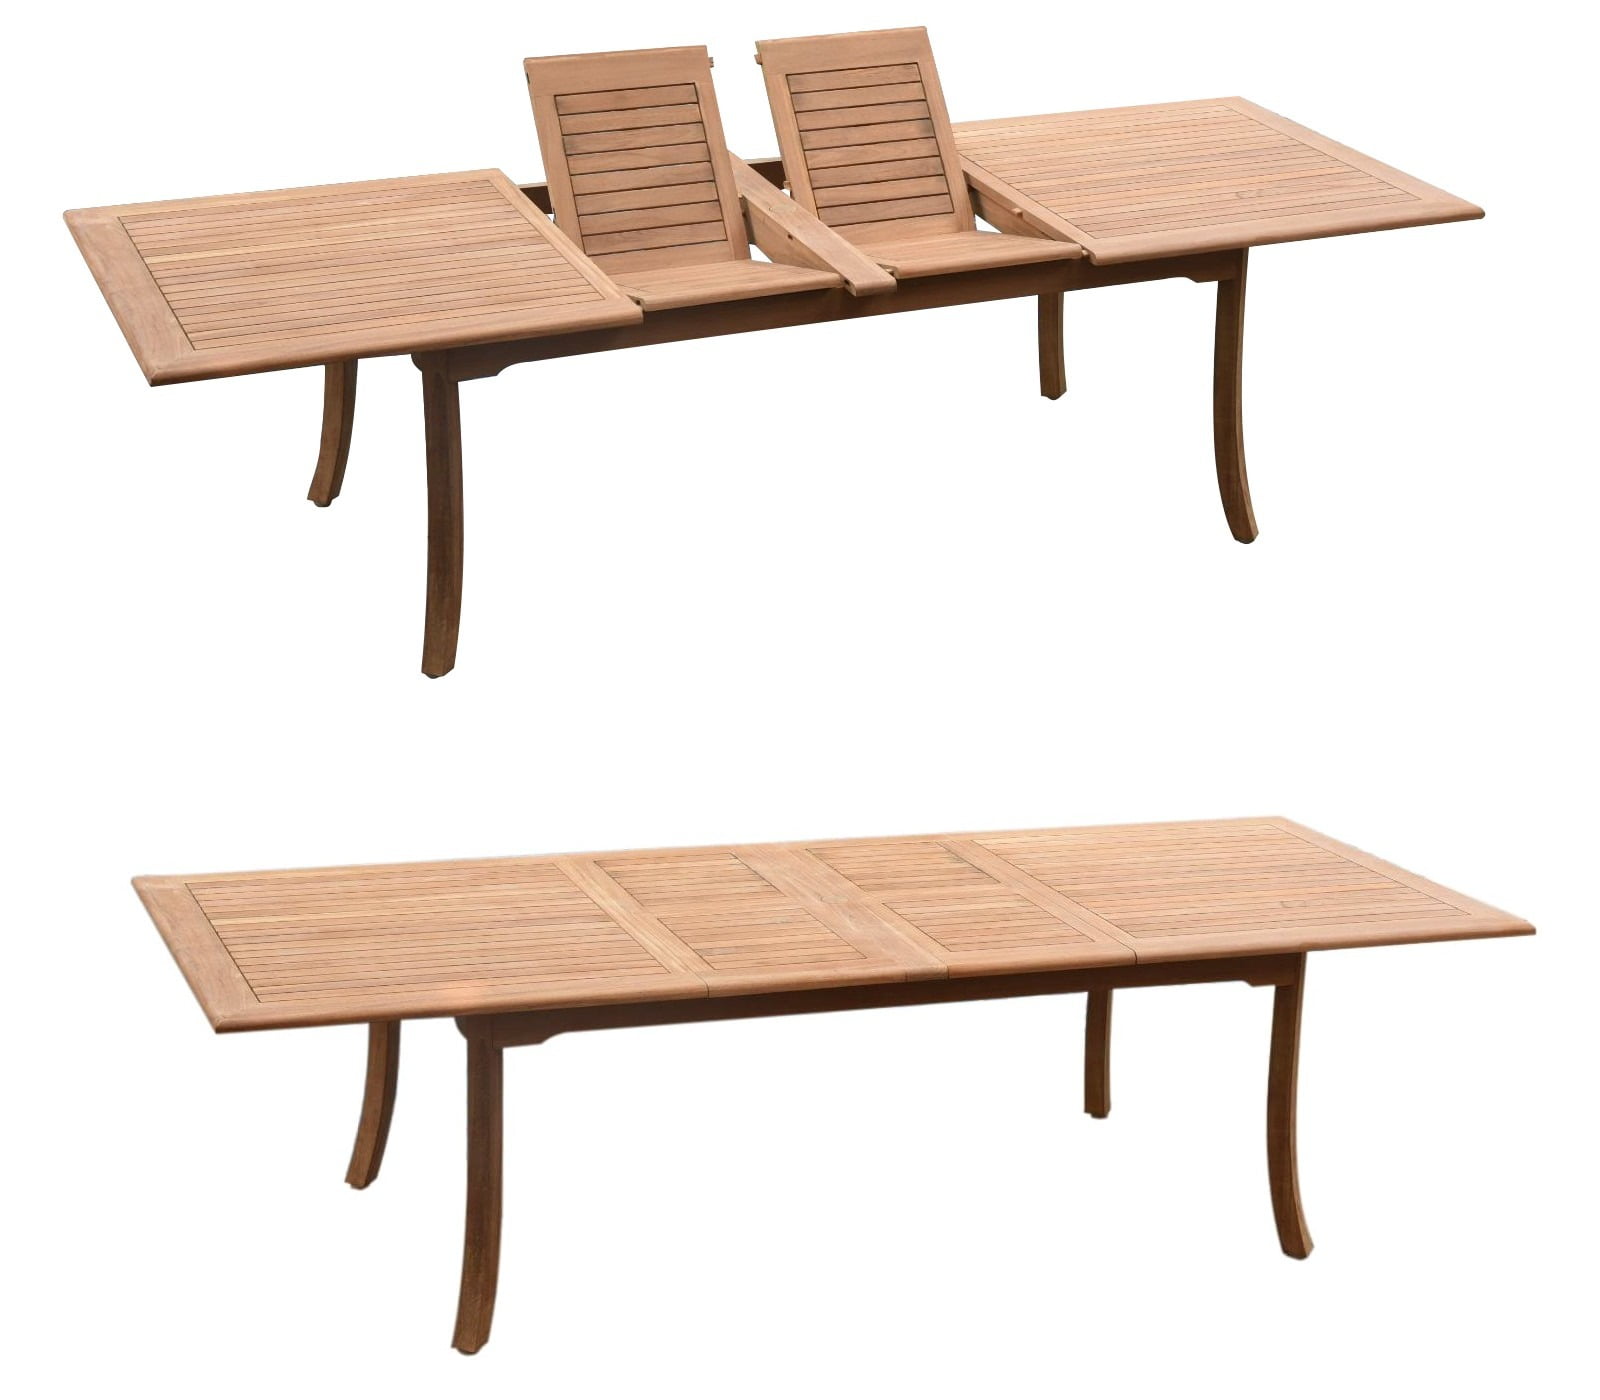 A-Grade Teak Wood Mas 117" Rectangle Double Extension Dining Table Outdoor Patio 